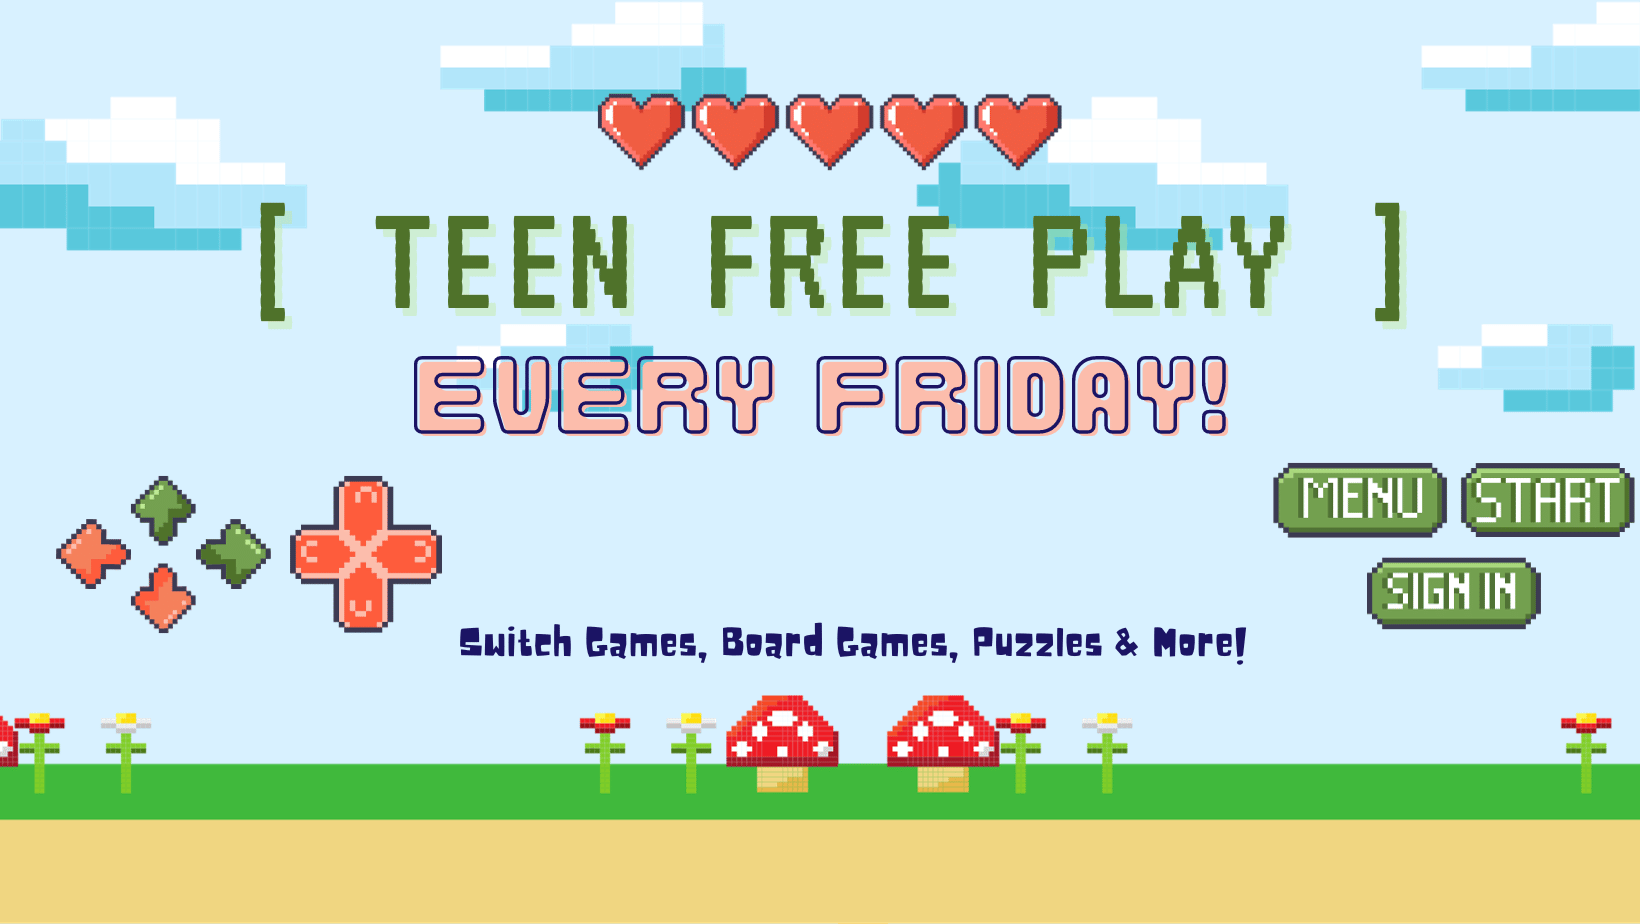 Teen Free Play (Facebook Cover)